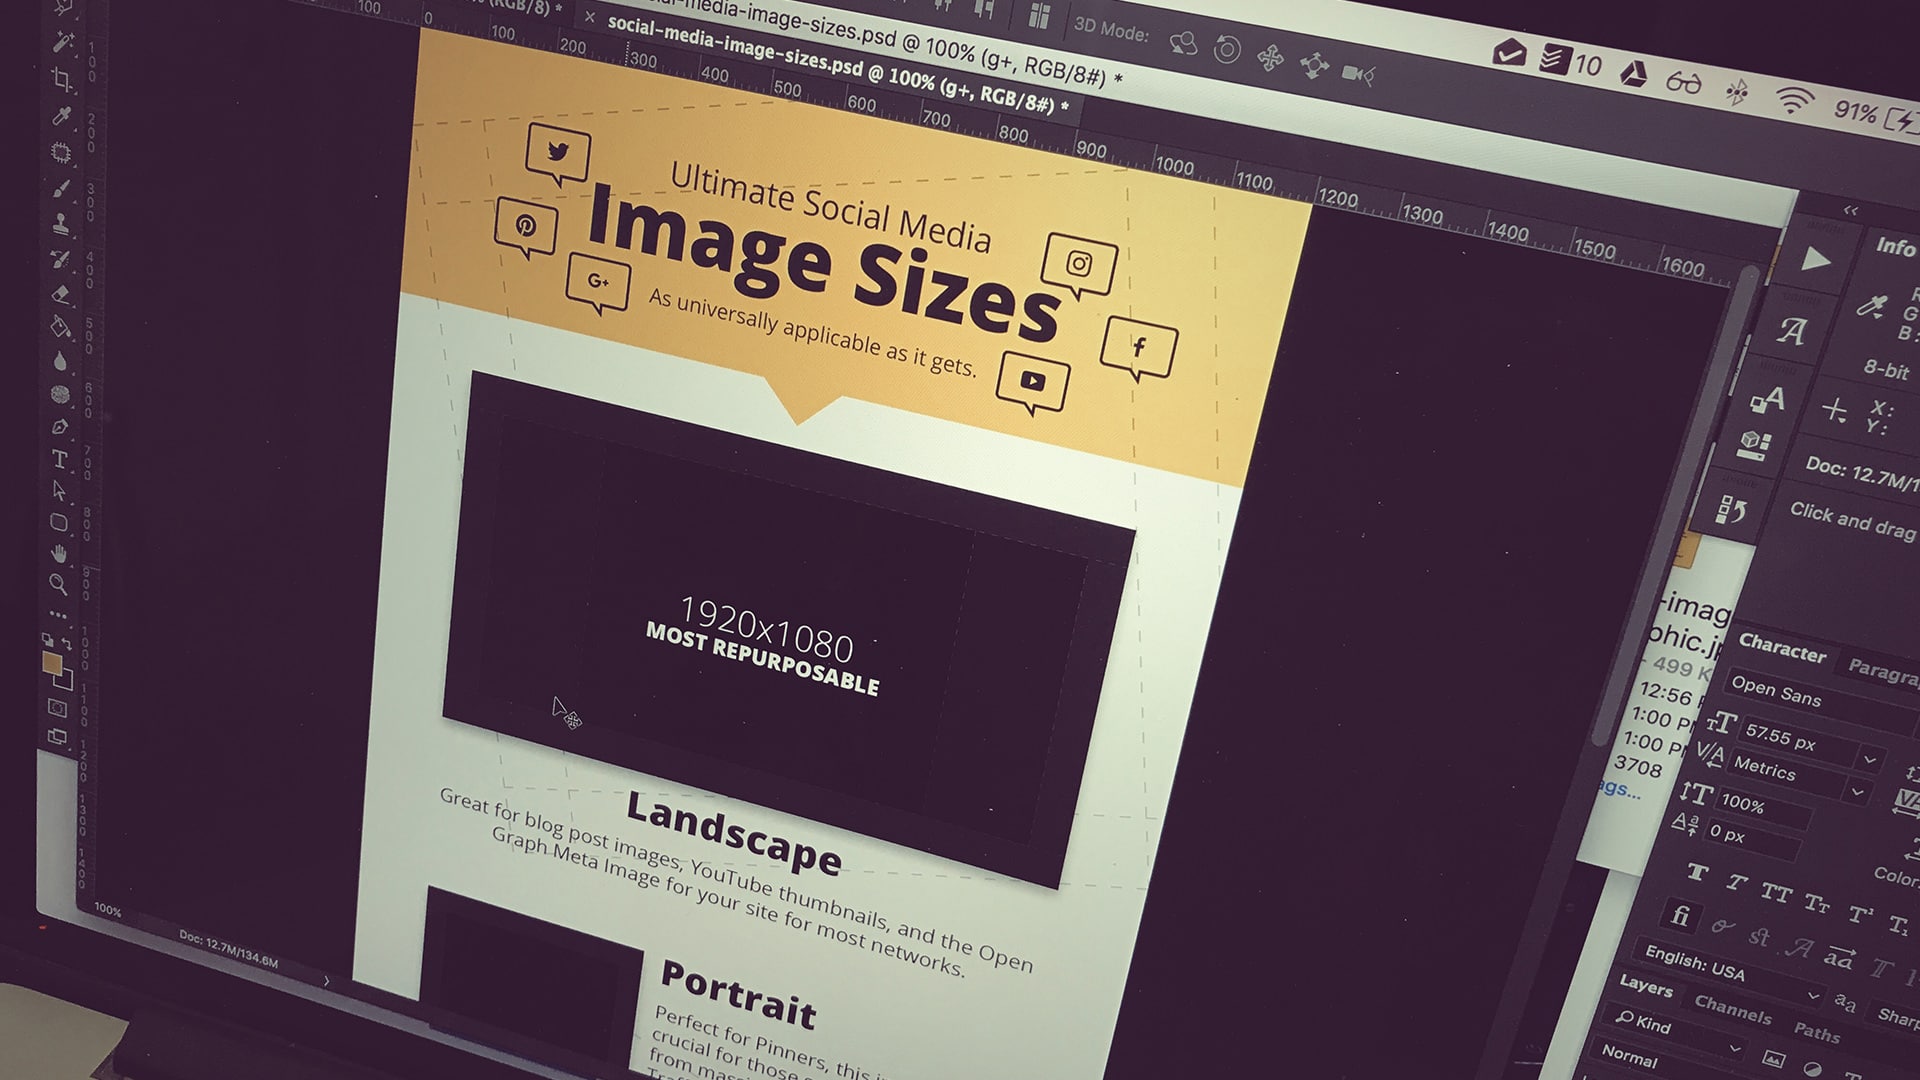 The Ultimate Social Media Image Sizes + Templates